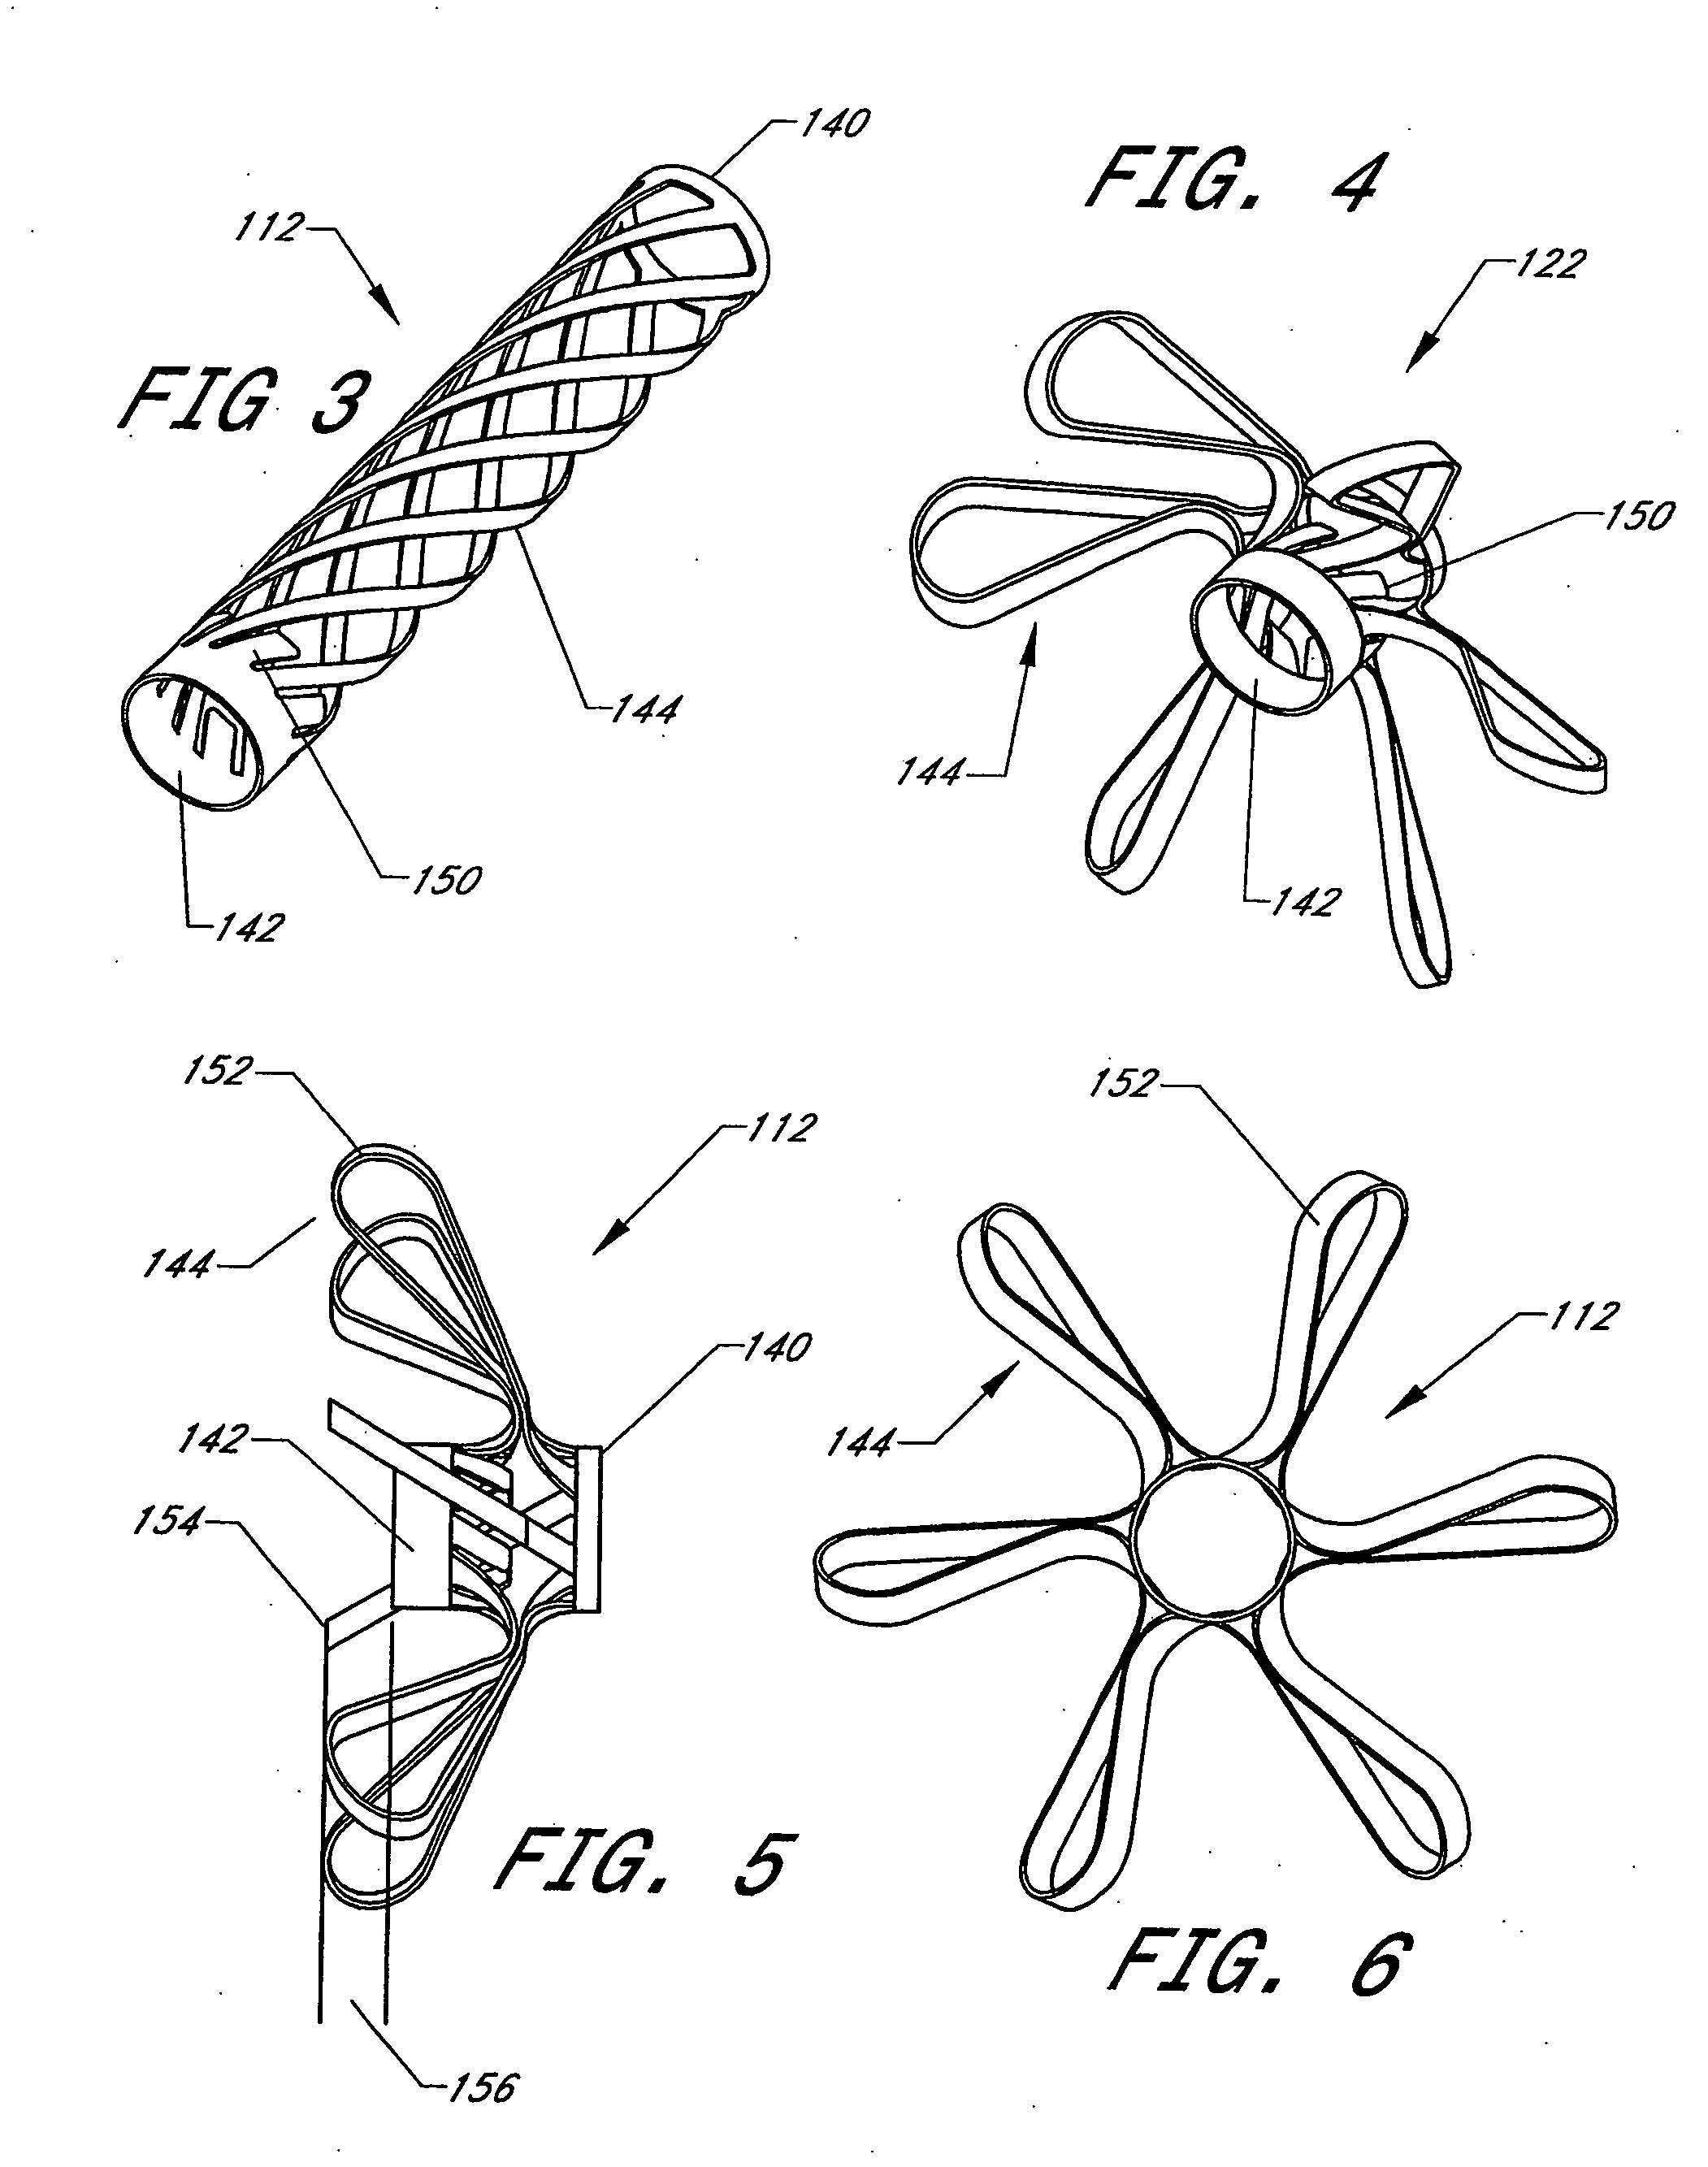 Implantable pressure transducer system optimized for anchoring and positioning